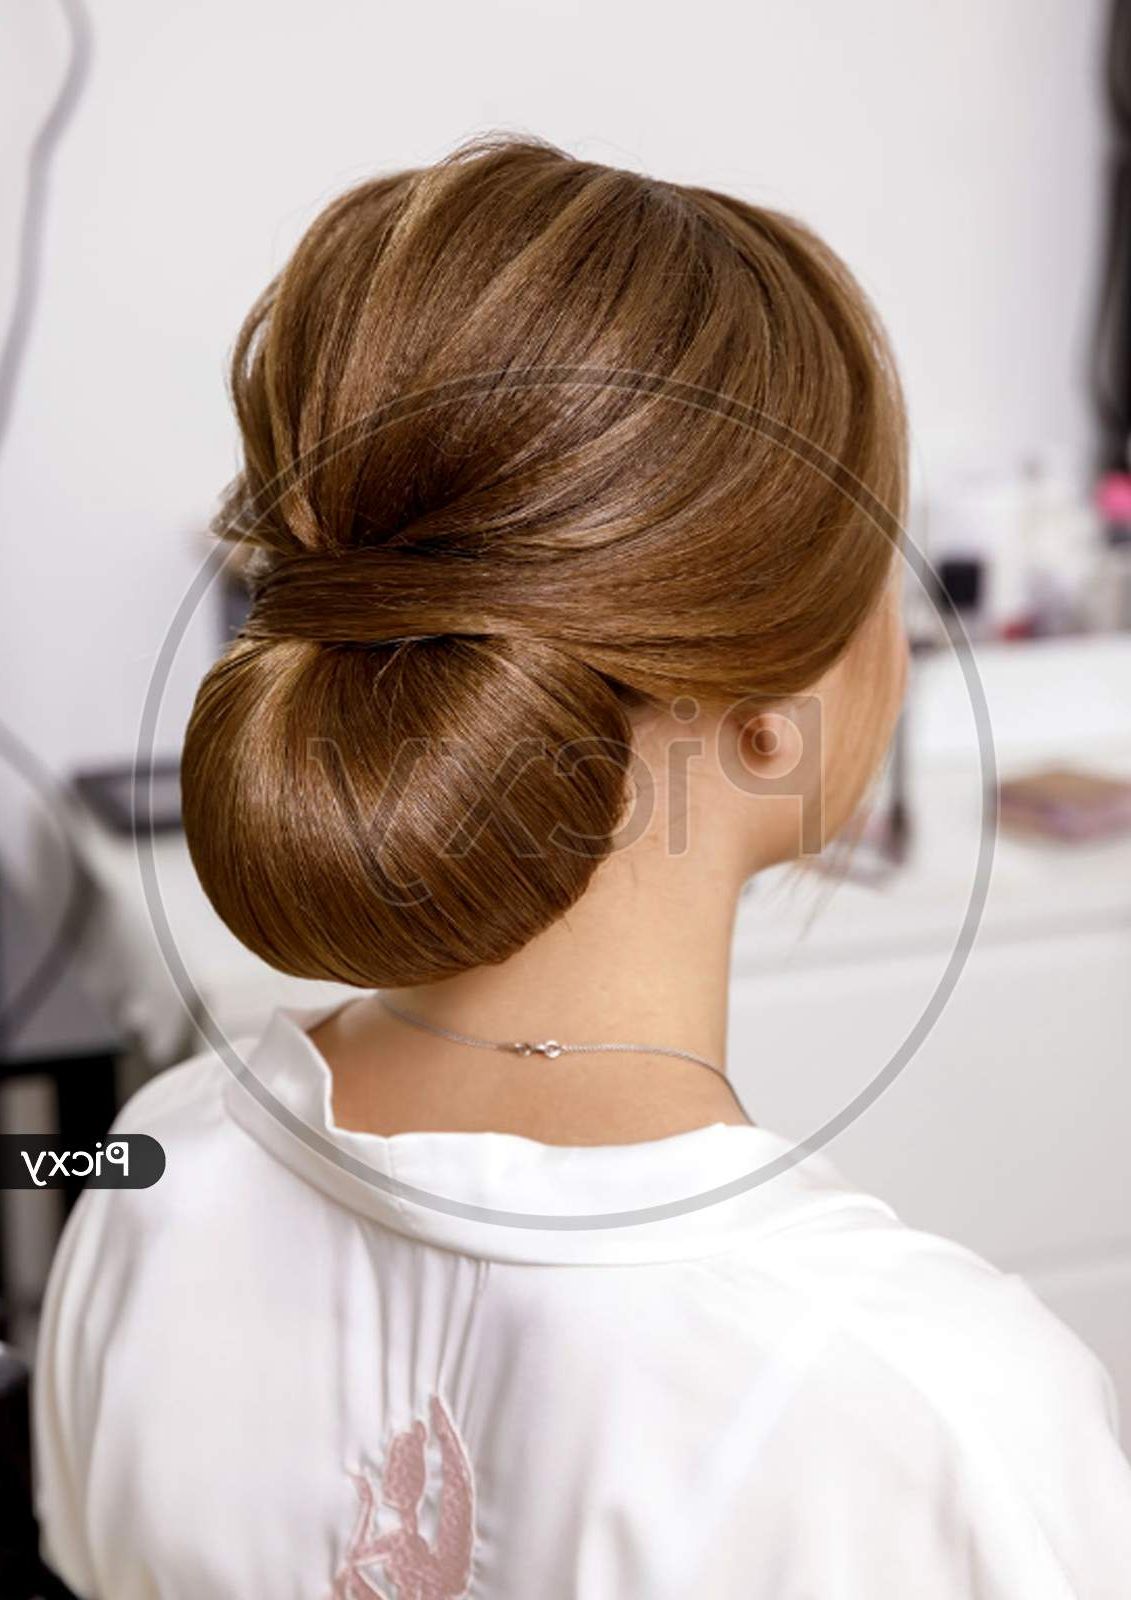 Most Recently Released Low Bun For Straight Hair Regarding Image Of Hairstyle Low Bun On Light Brown Straight Hair For The Bride On  The Wedding Day Uu693130 Picxy (View 8 of 15)